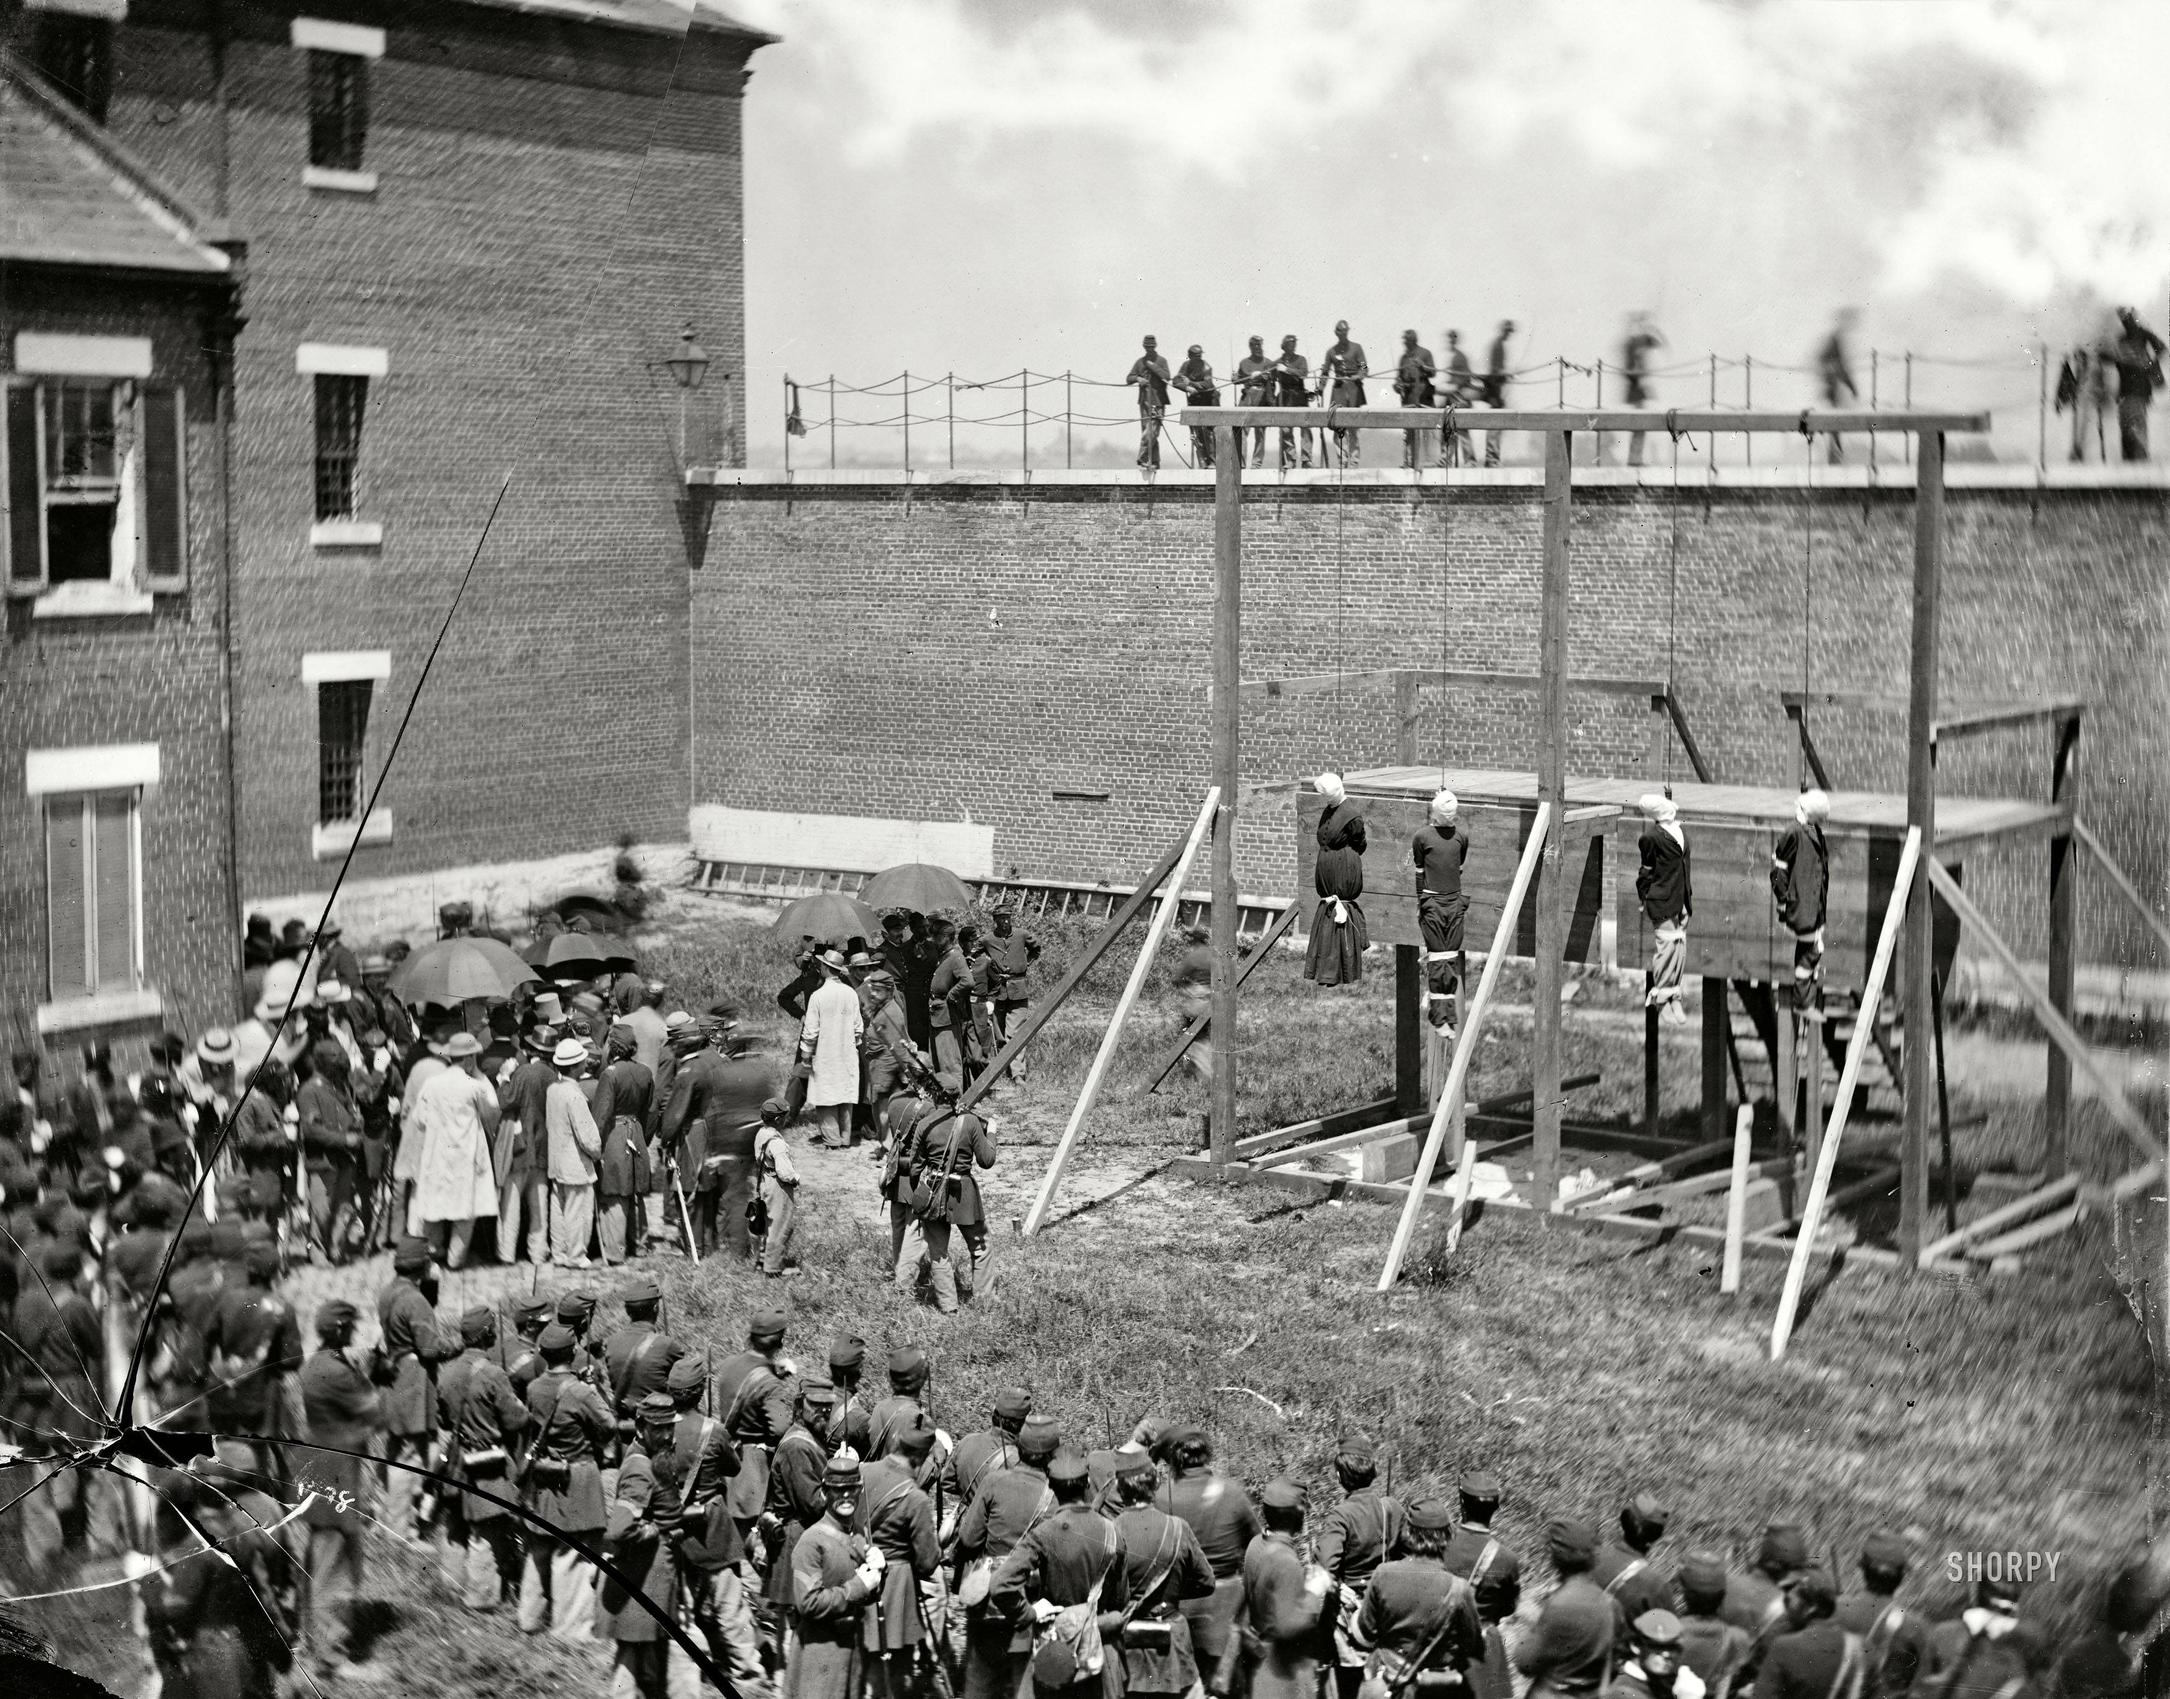 1865: Hanging hooded bodies of the four Lincoln assassination conspirators